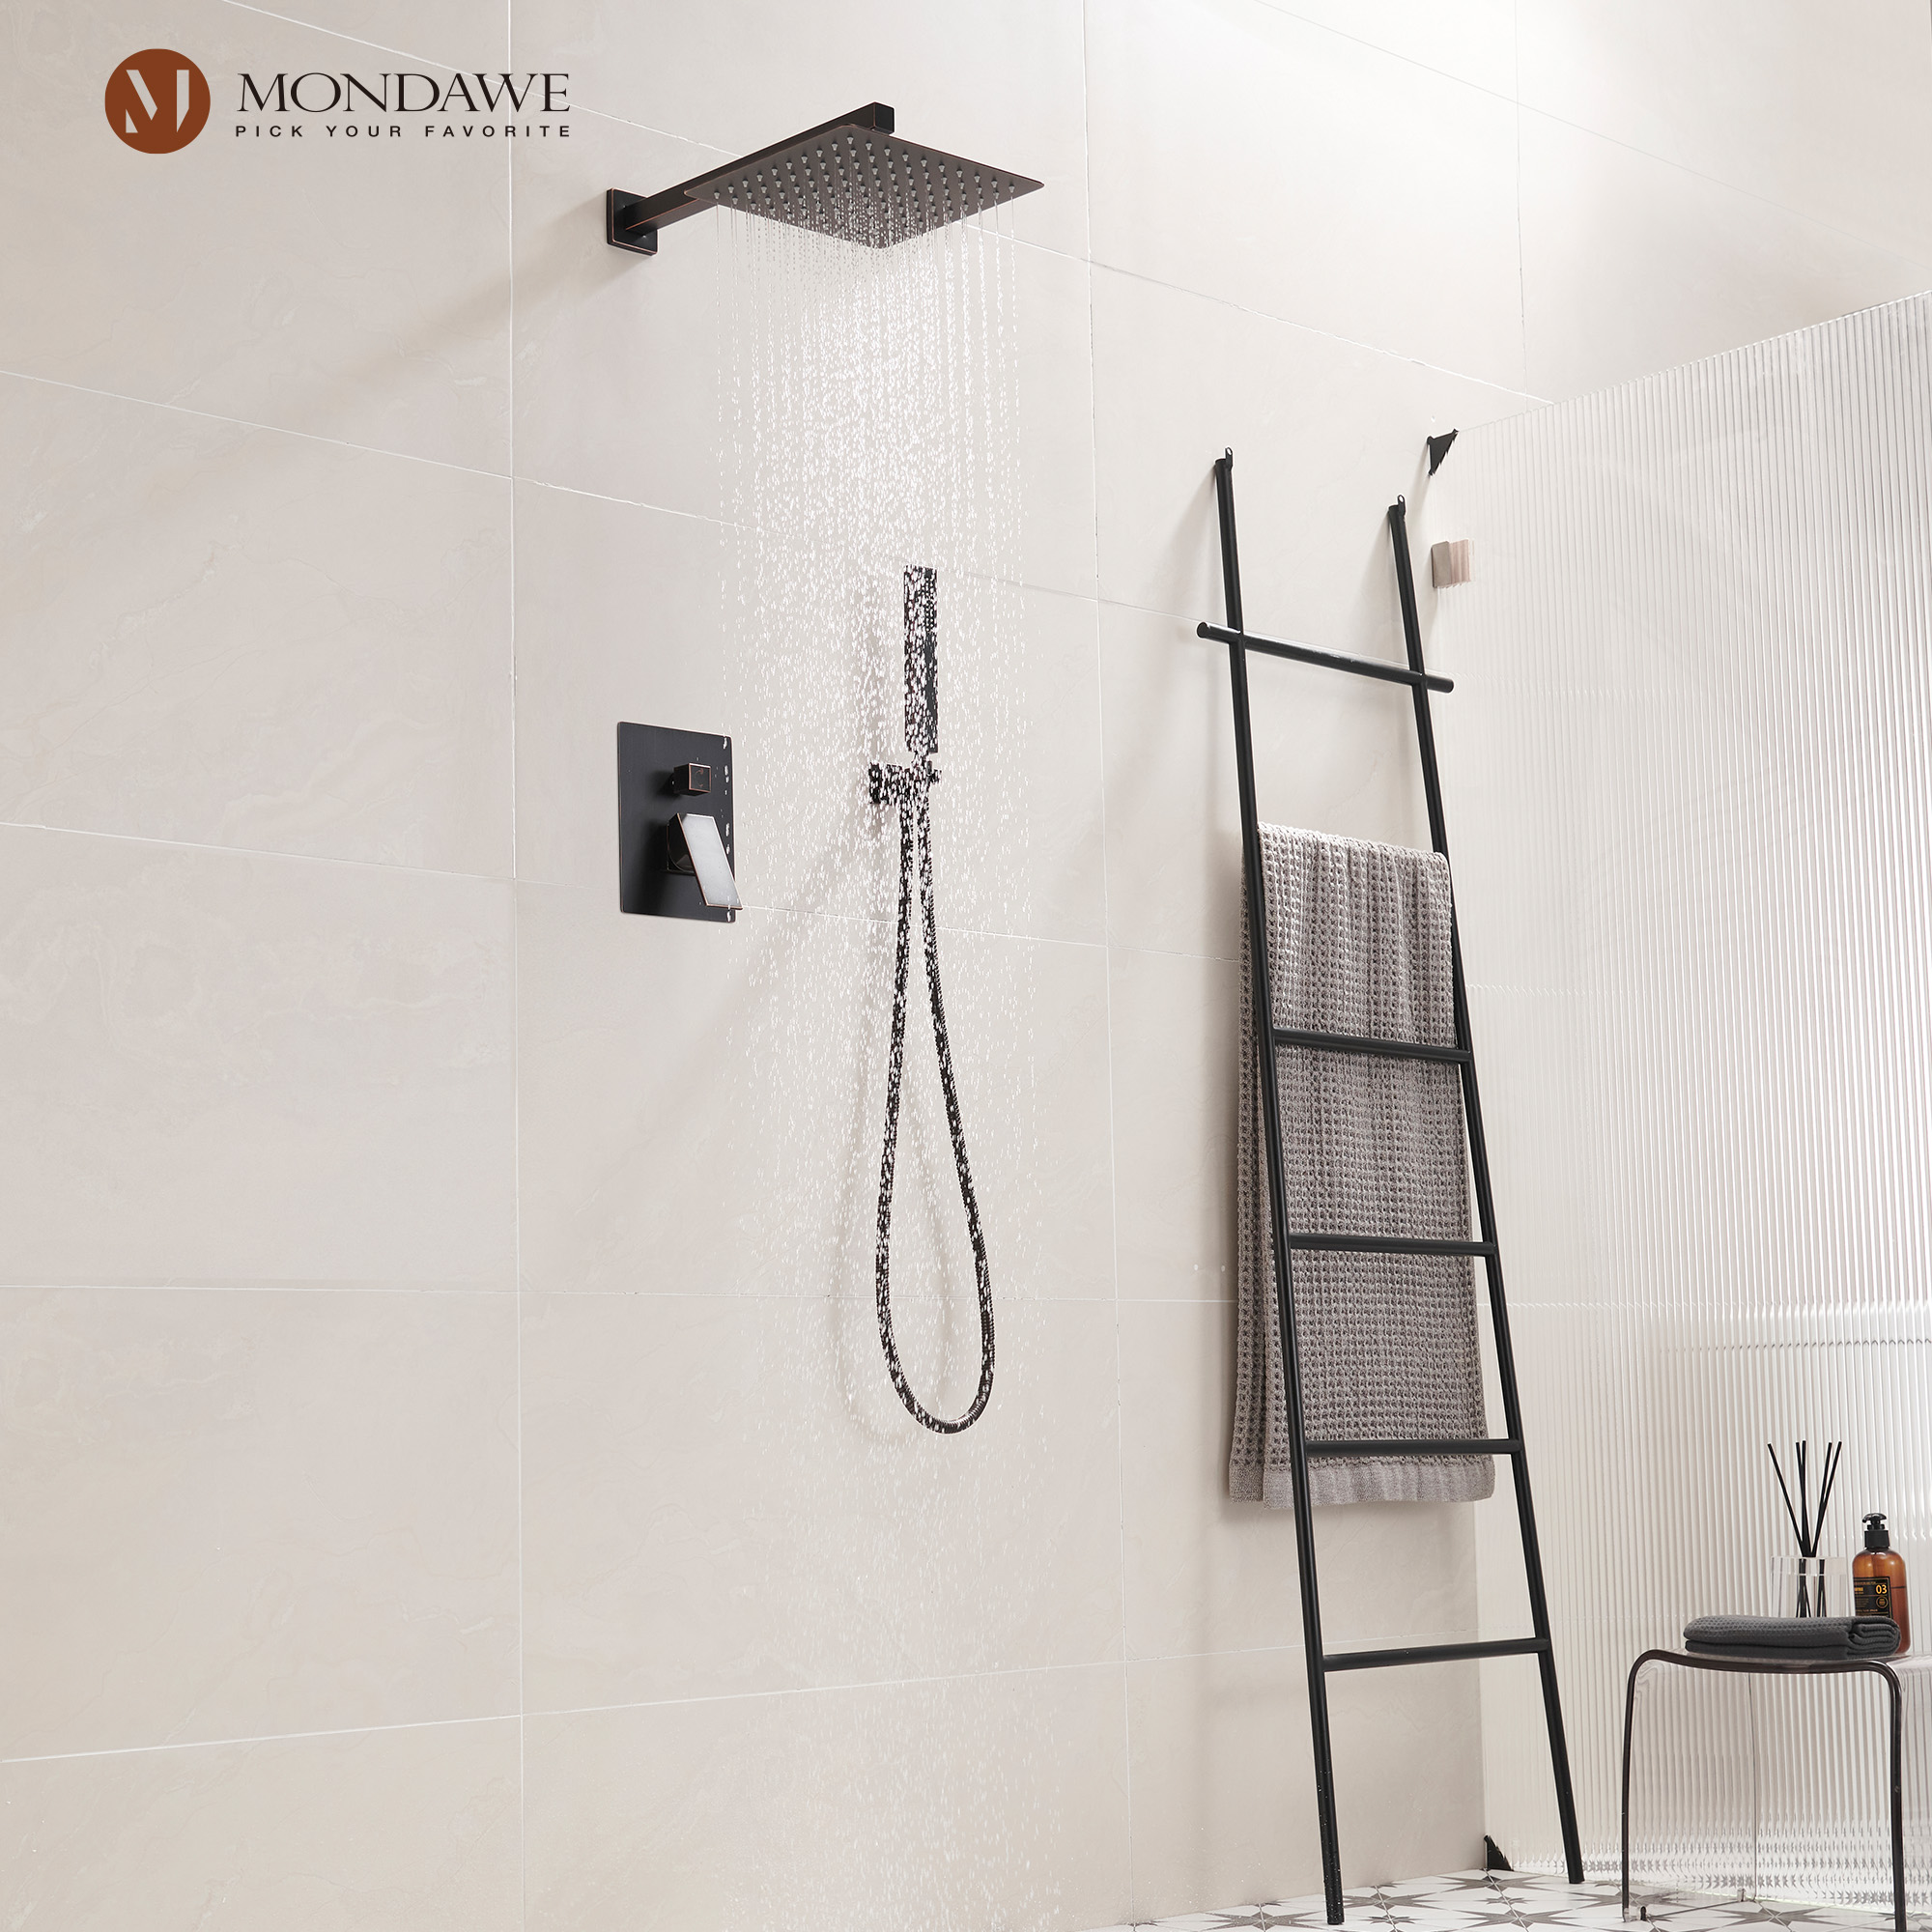 Mondawe 2 Functions Wall Mount Square Complete Shower System with 2.5 GPM 10 in Black/Rose Gold-Mondawe